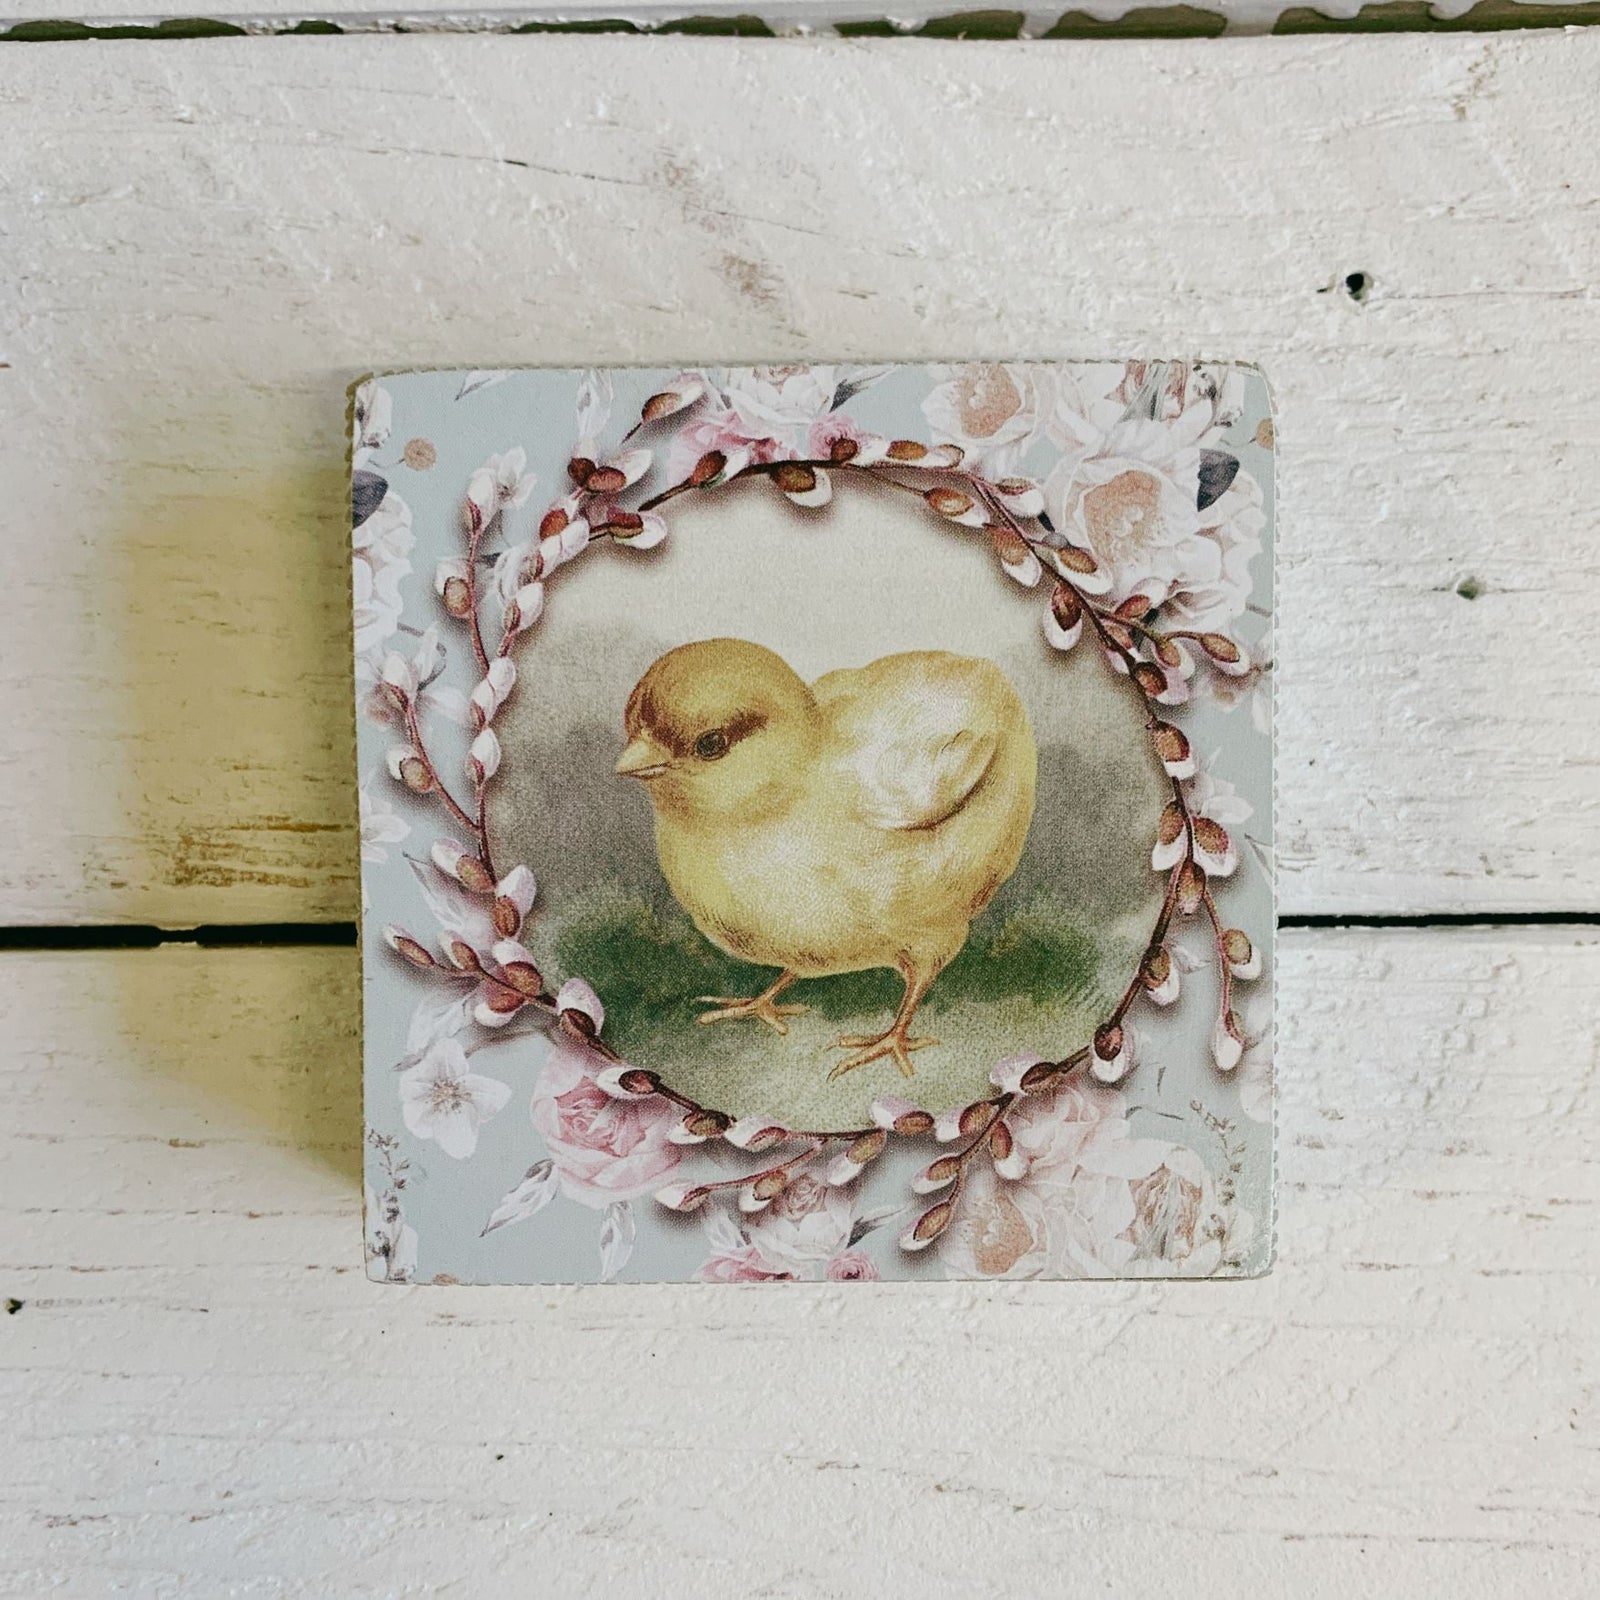 Chick Vintage Wooden Block Sign | Square Easter Spring Wall Desk Decor | 3" x 3"